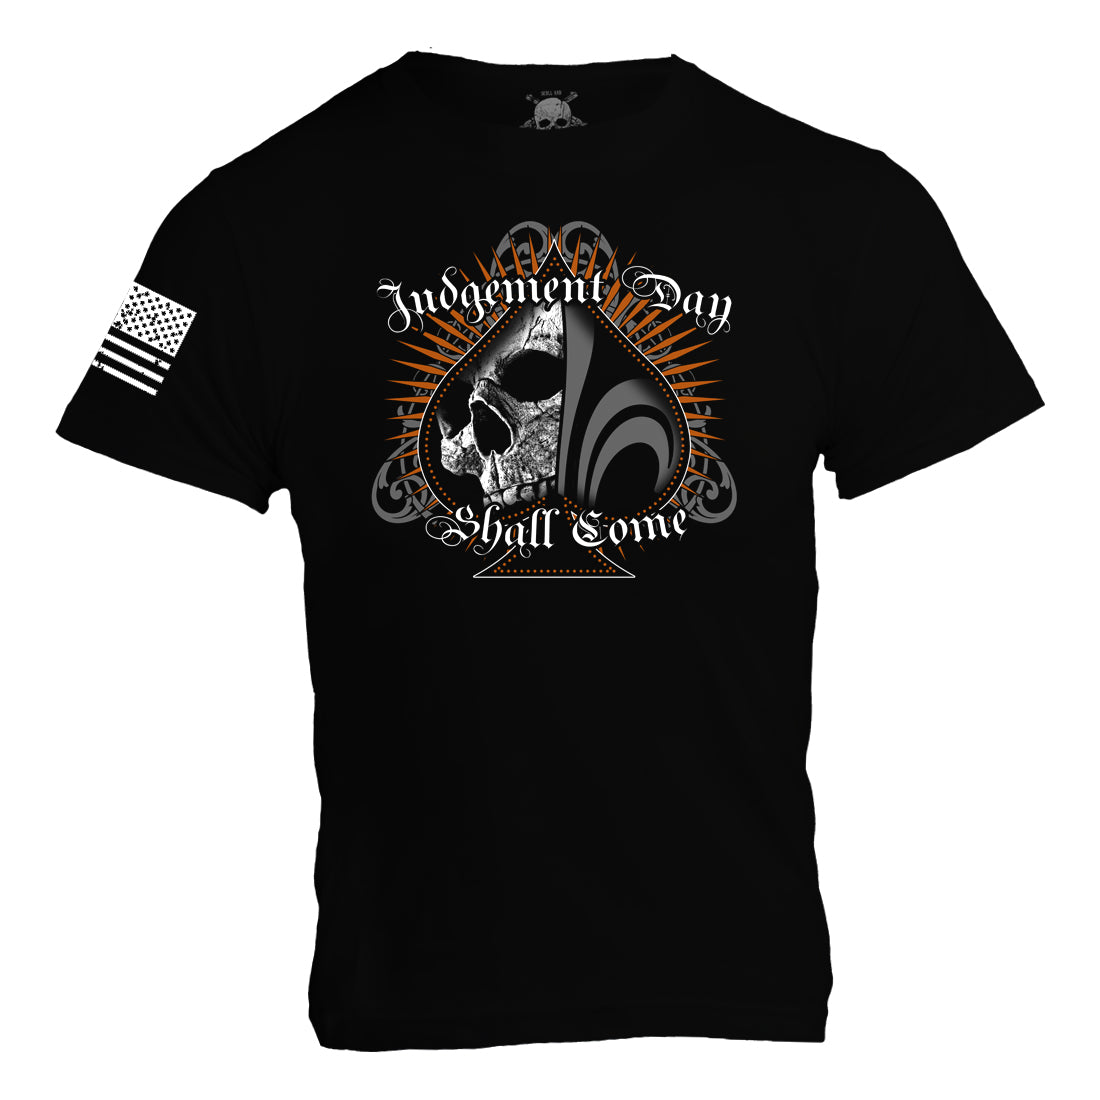 Judgement Day Shall Come / Ace of Spades- Black - Mens